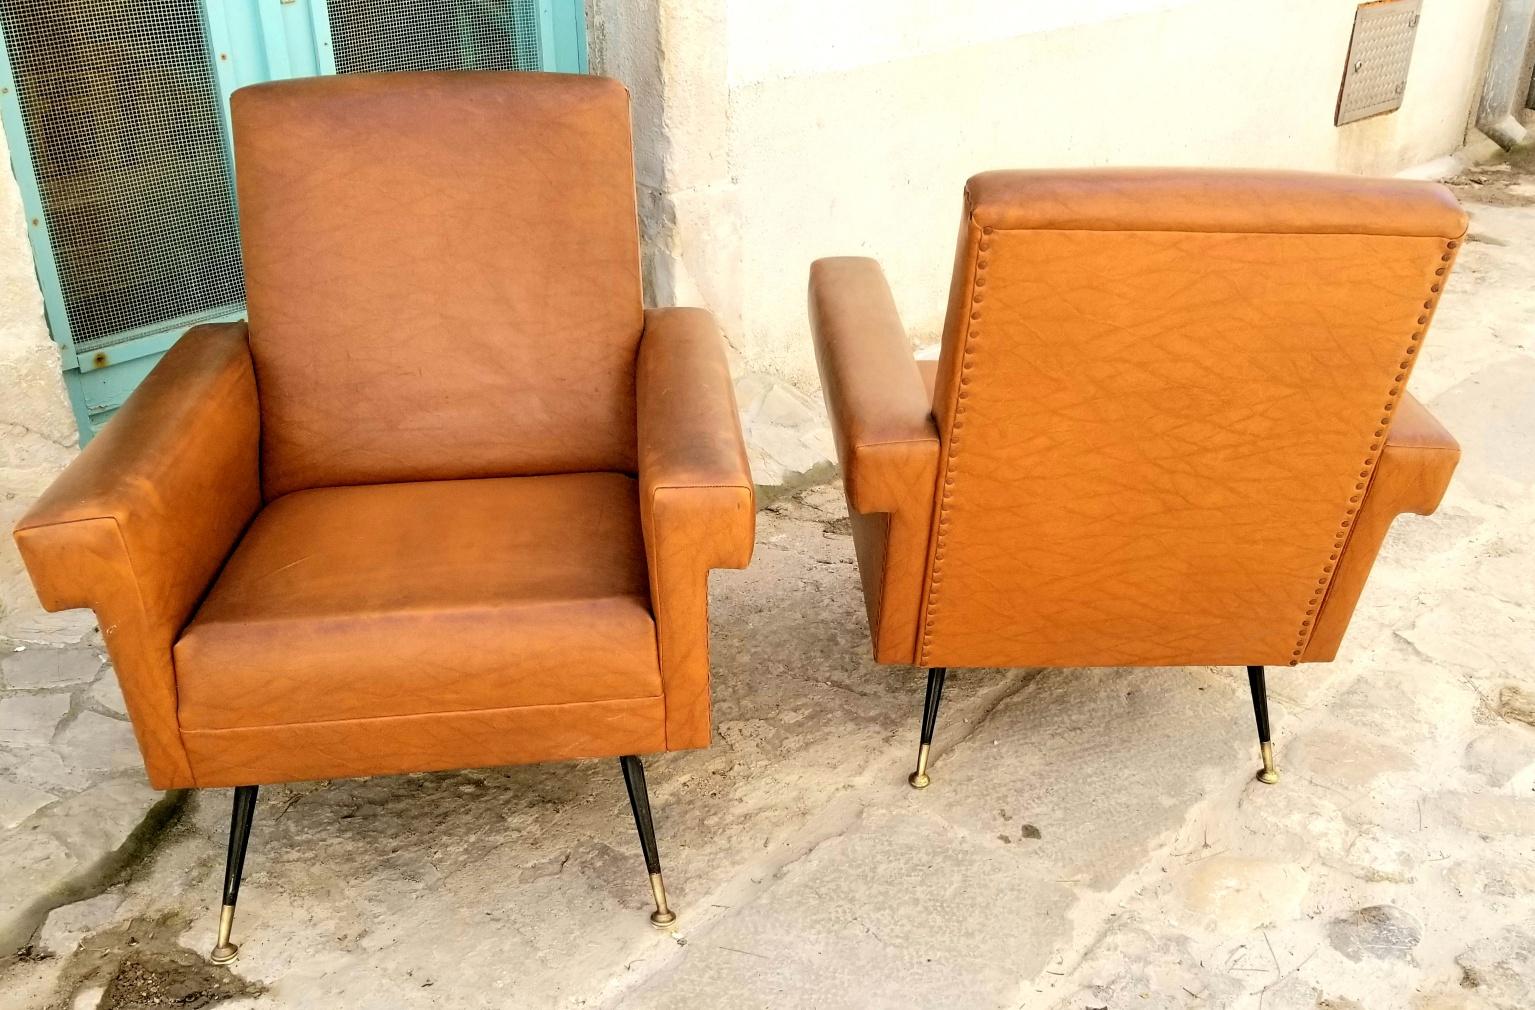 Italian pair of chairs, period 1950 s original vinyl upholstery metal and brass legs. Great Italian design and comfortable seating.
   